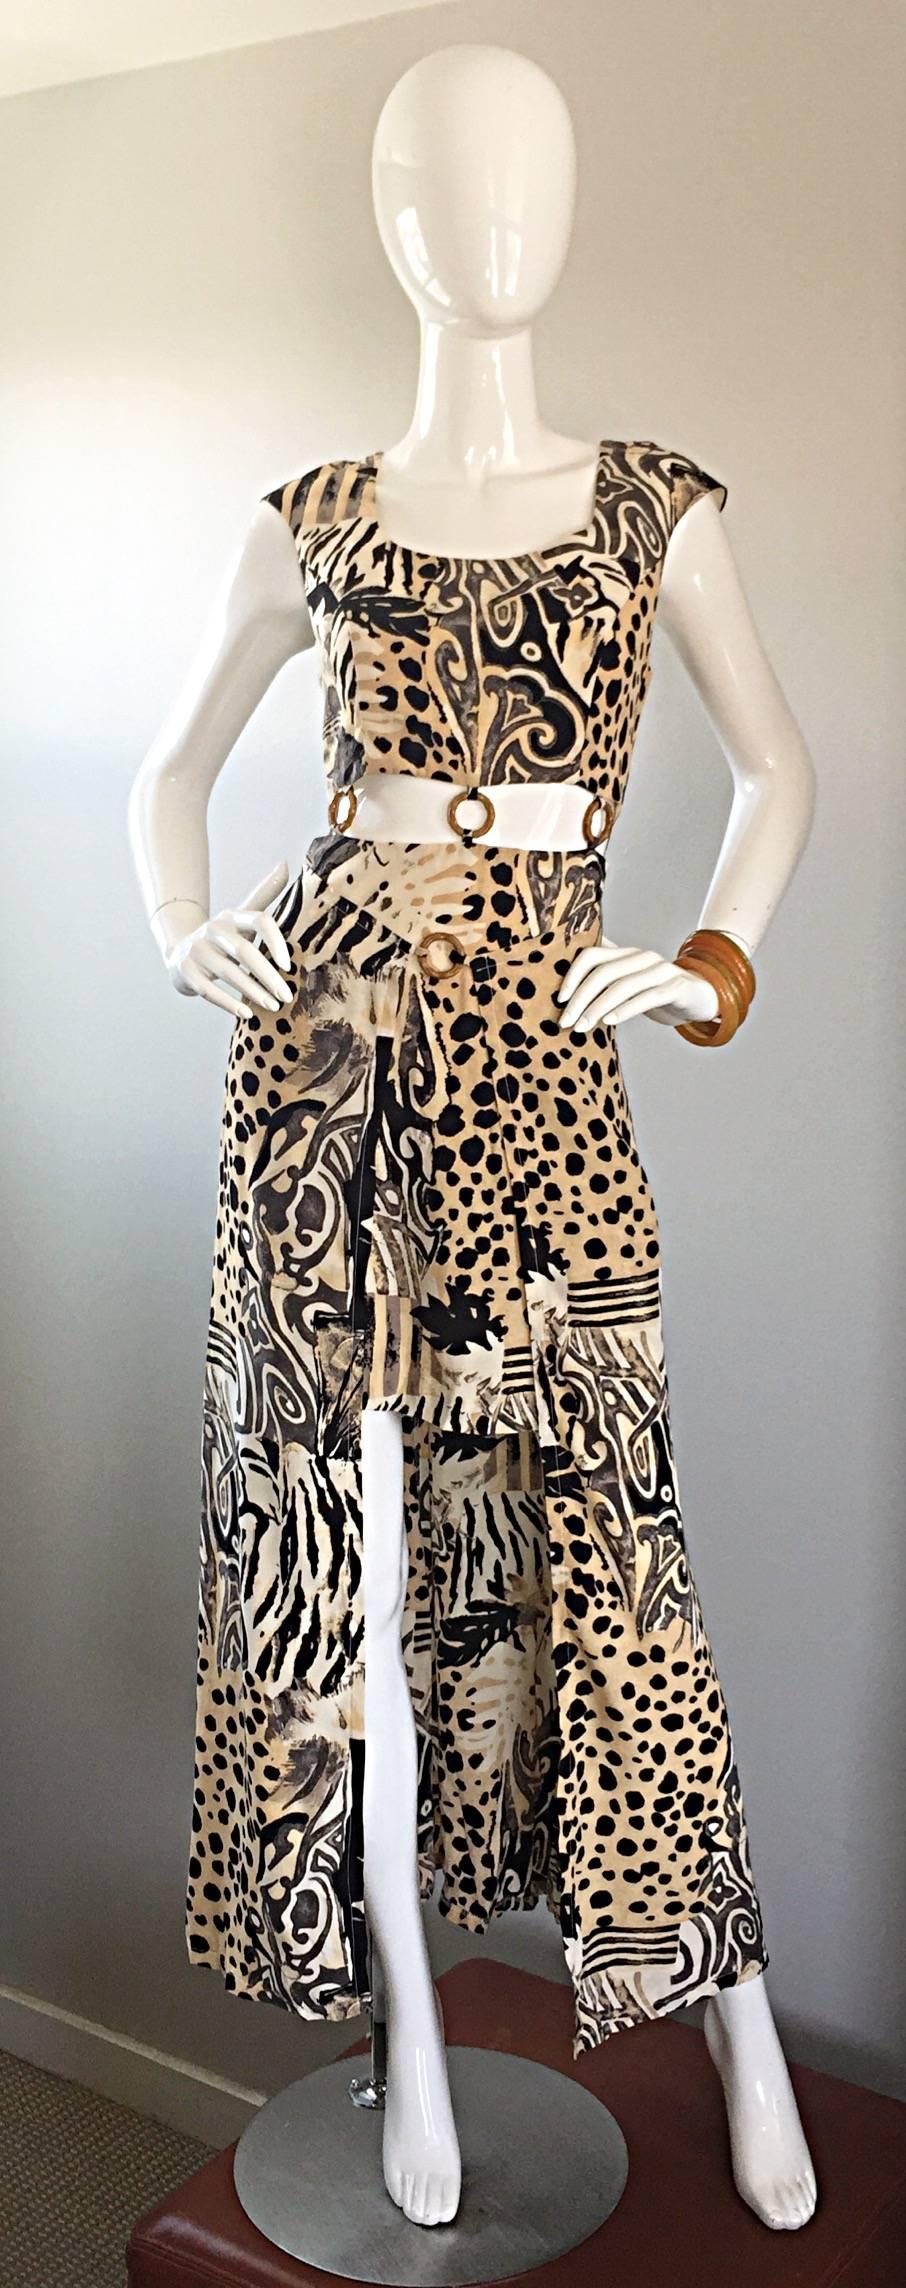 Incredible 90s vintage boho dress by Joseph Ribkoff! Wonderful animal leopard print, mixed with tribal prints in tan, taupe, brown and black. Round bamboo rings at cut-out waist. Features a mini skirt with a long train in the back. Words cannot even